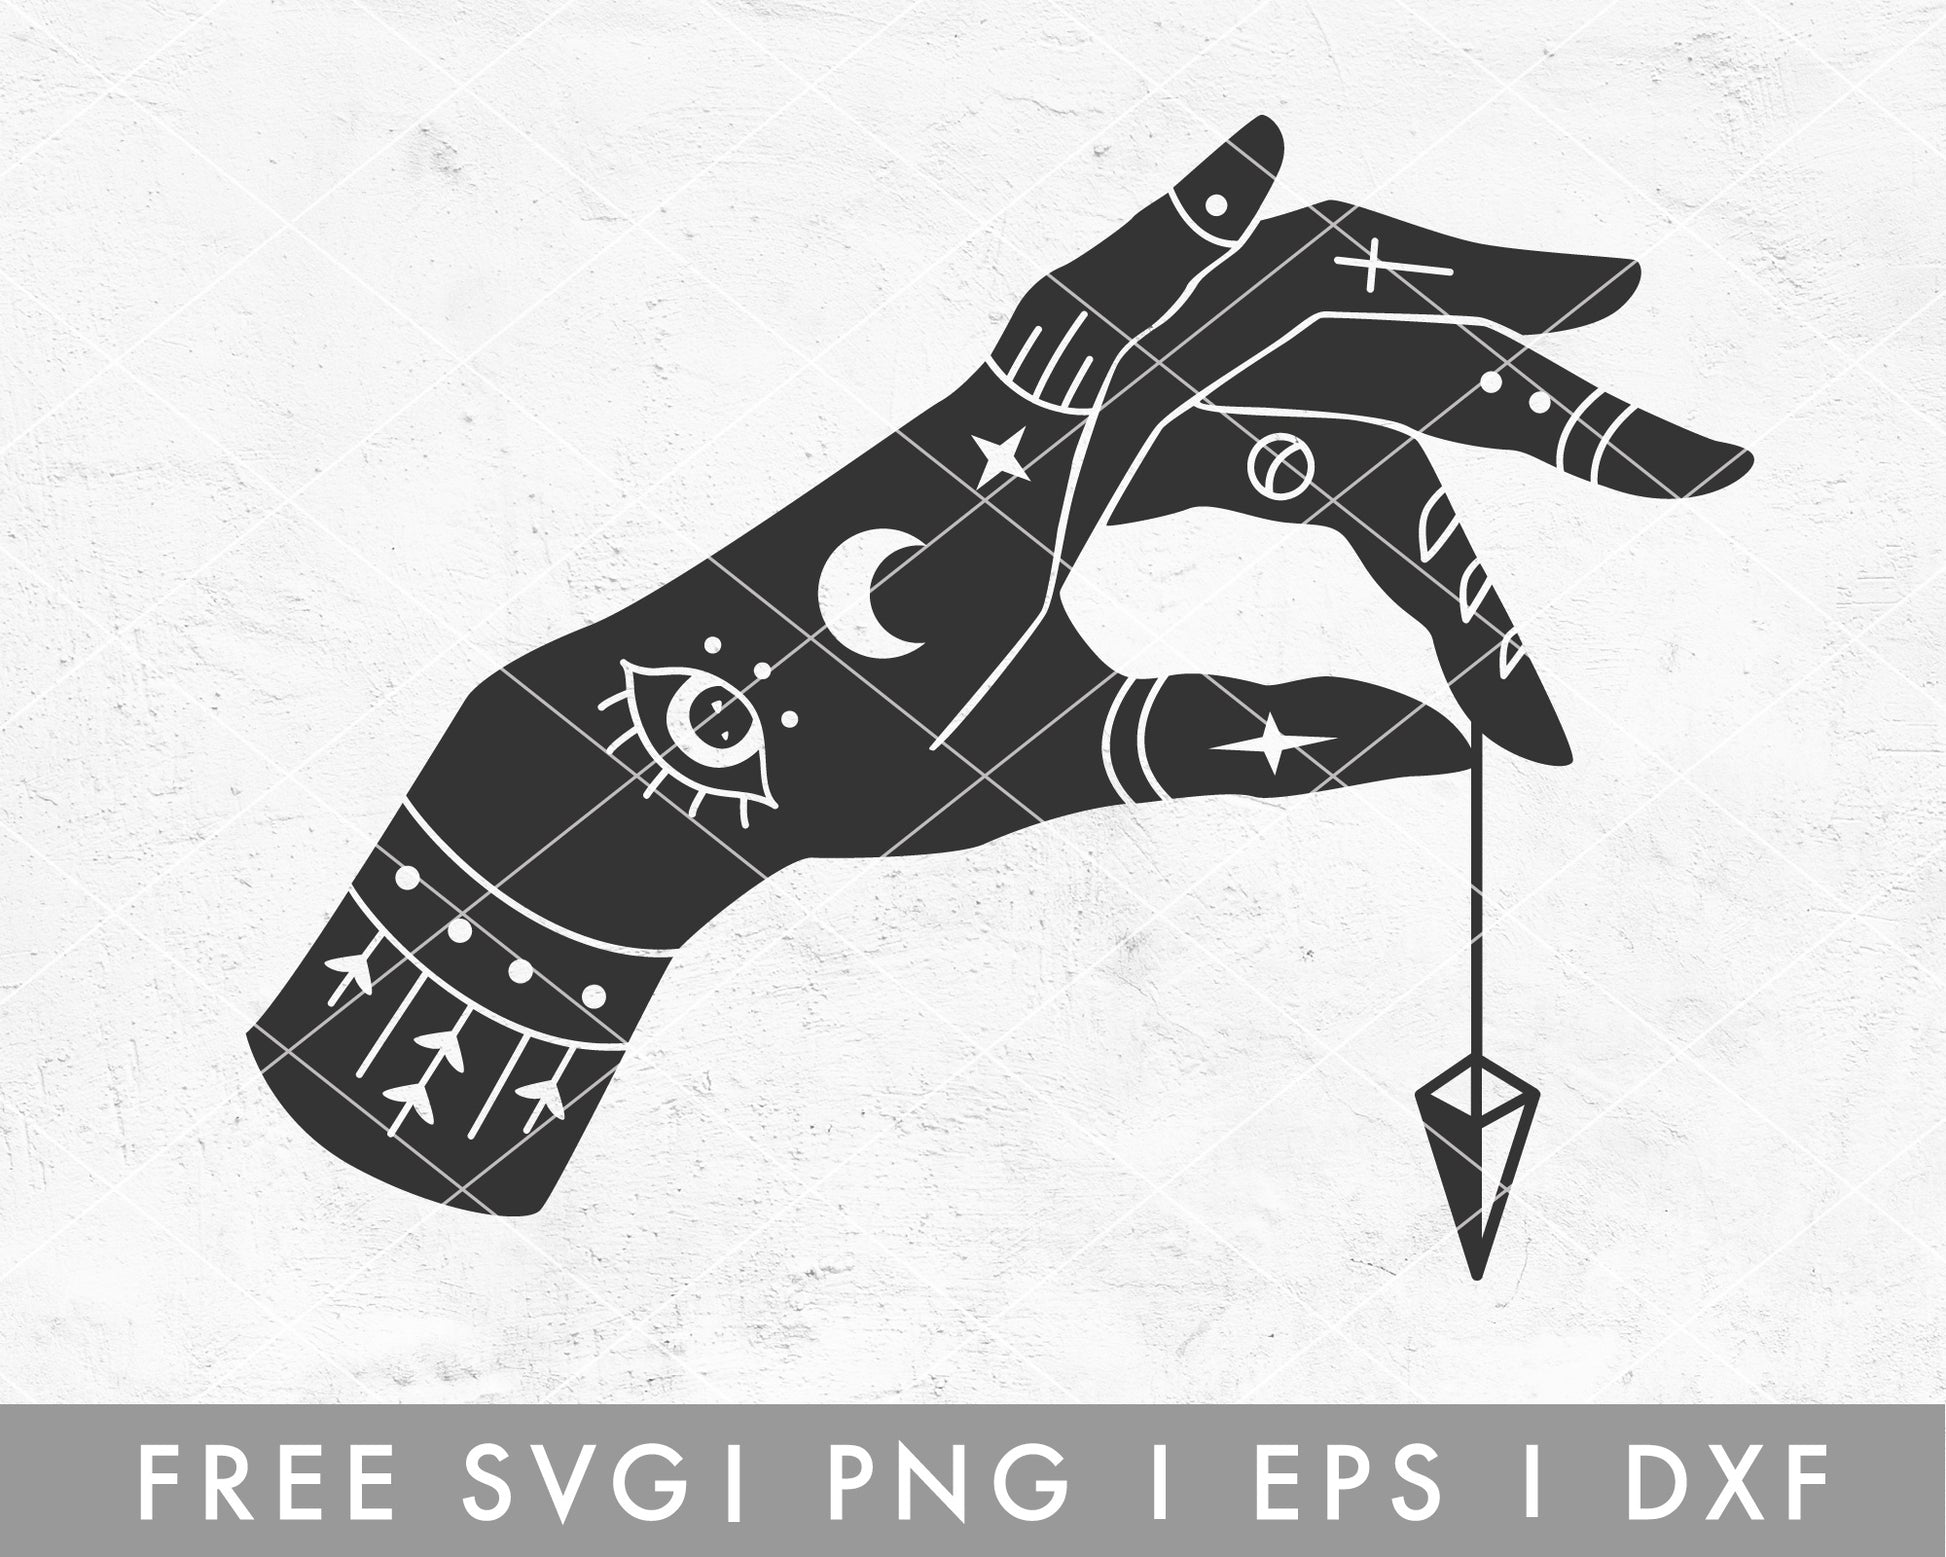 FREE Mythical Hand SVG Cut File for Cricut, Cameo Silhouette | Free SVG Cut File